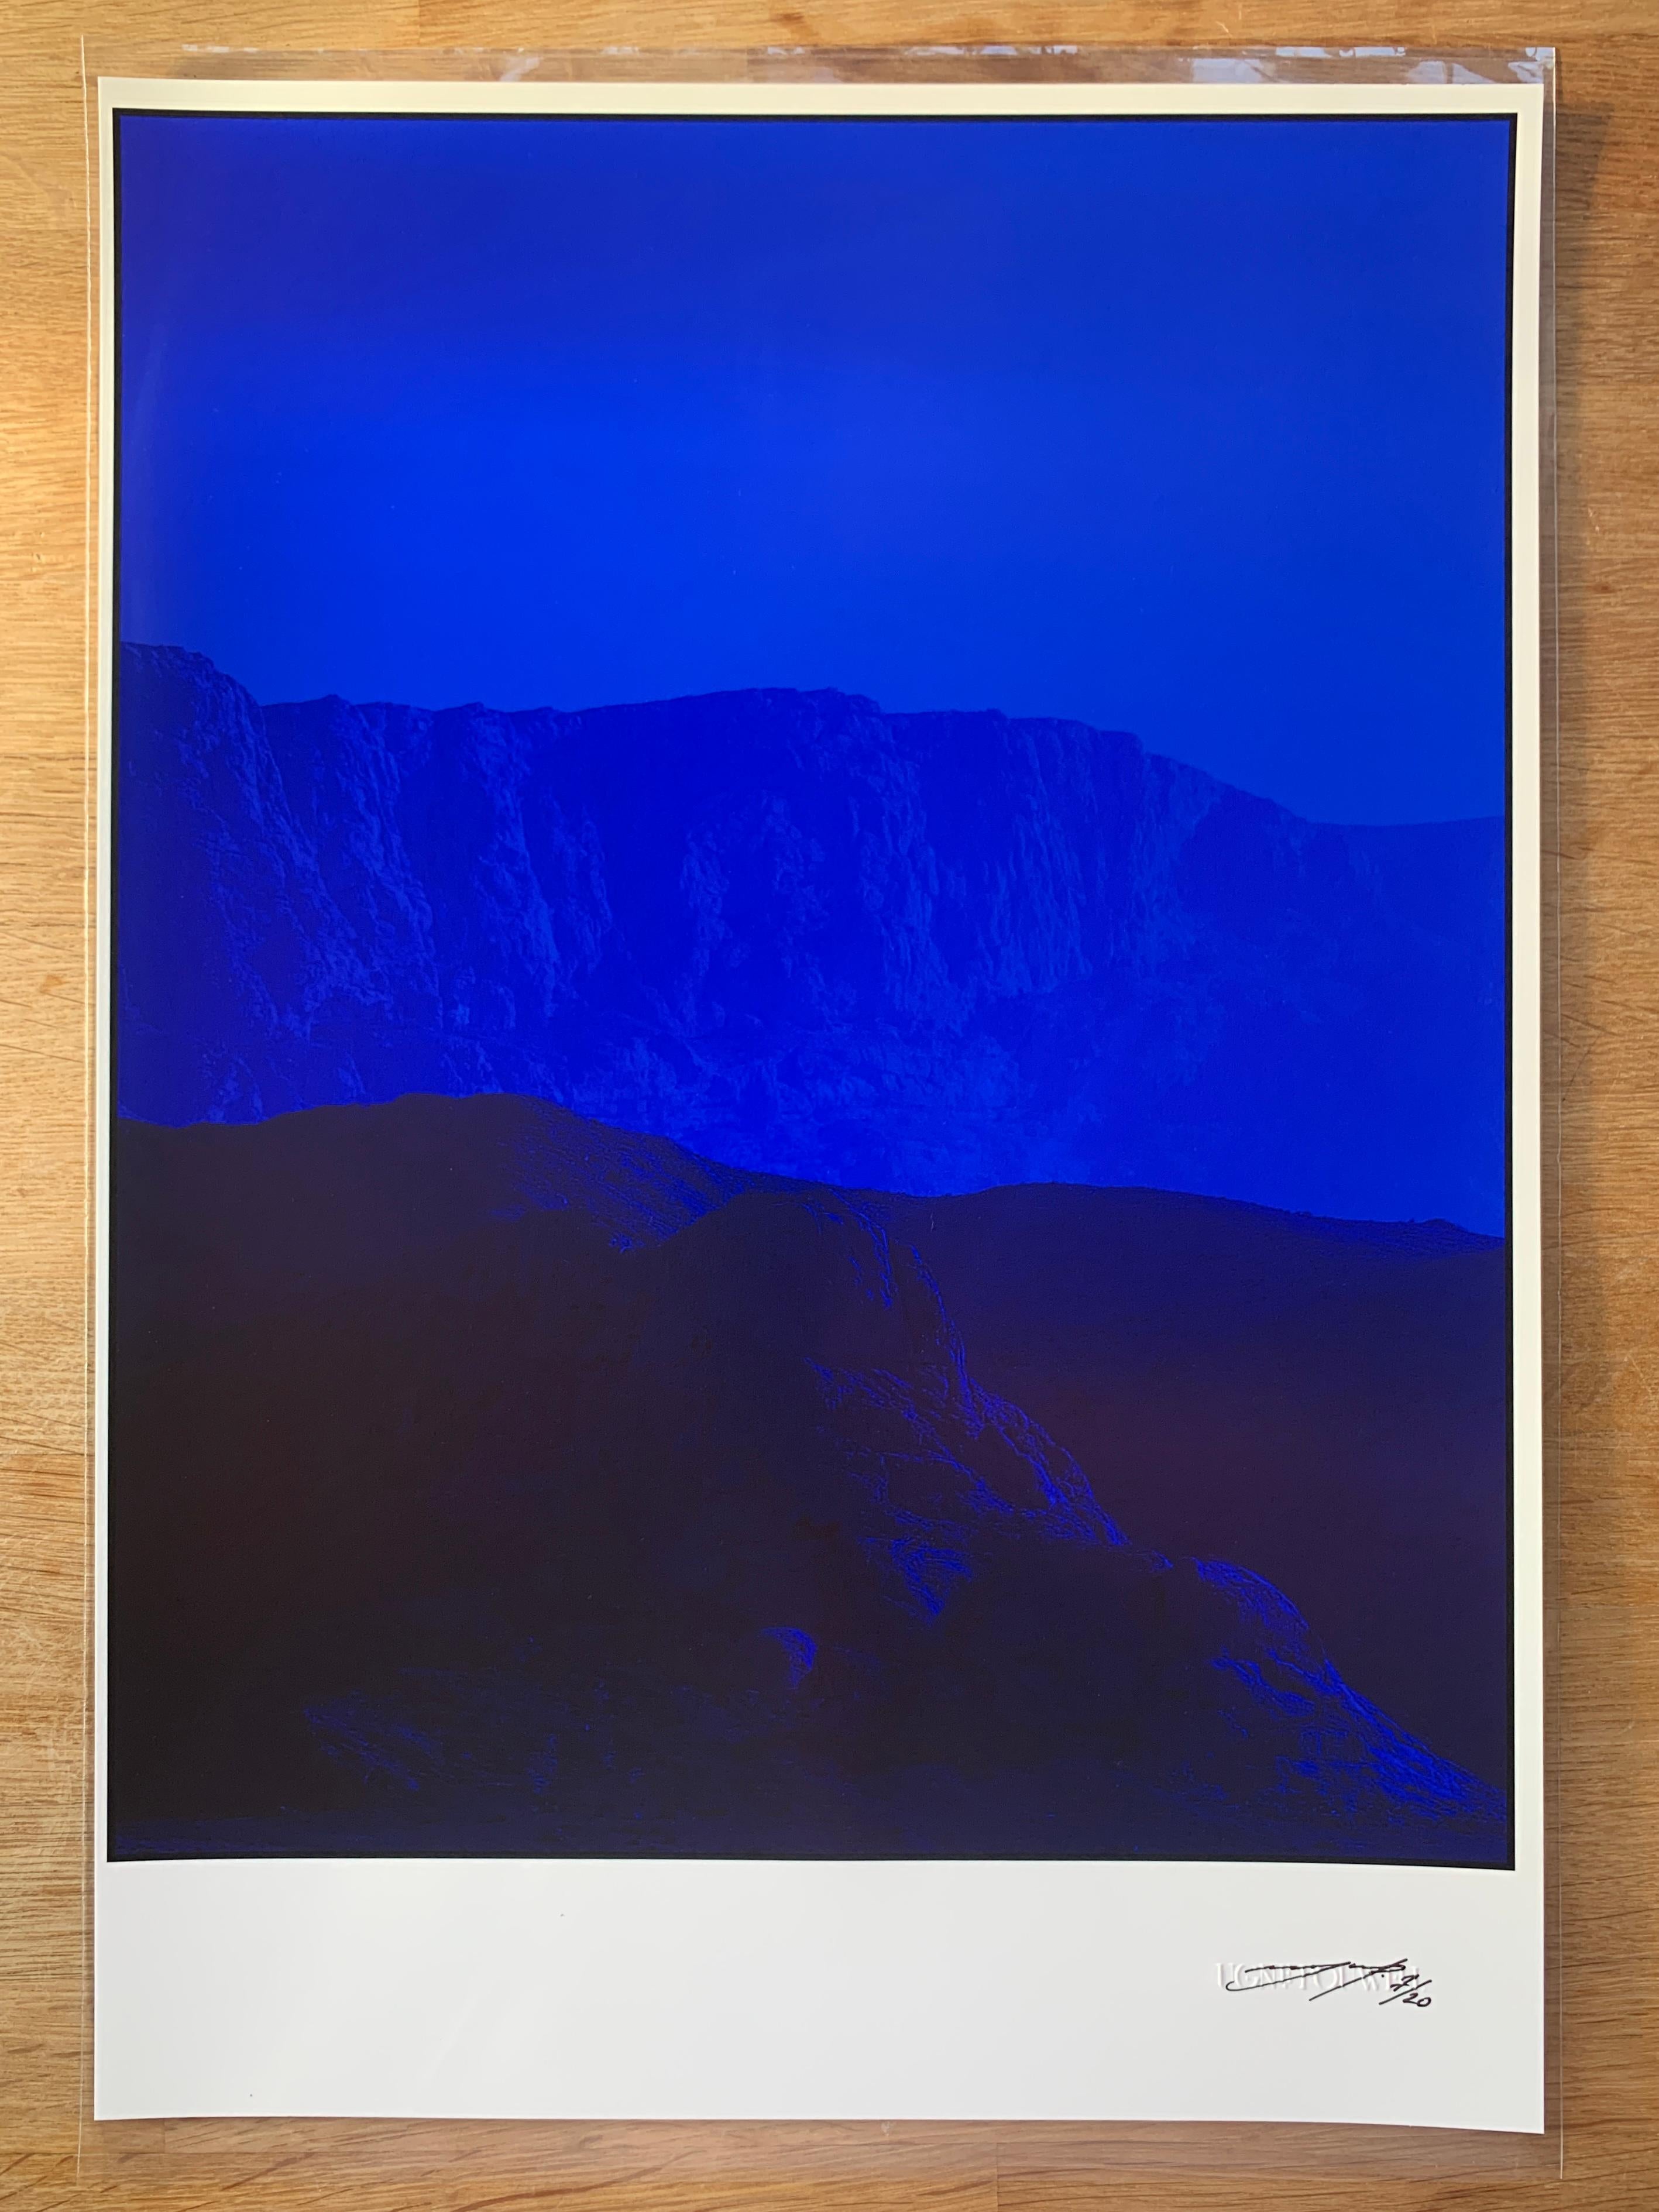 Ultramarine hills - abstract blue desert dunes, Limited edition 10 of 20 - Photograph by Ugne Pouwell